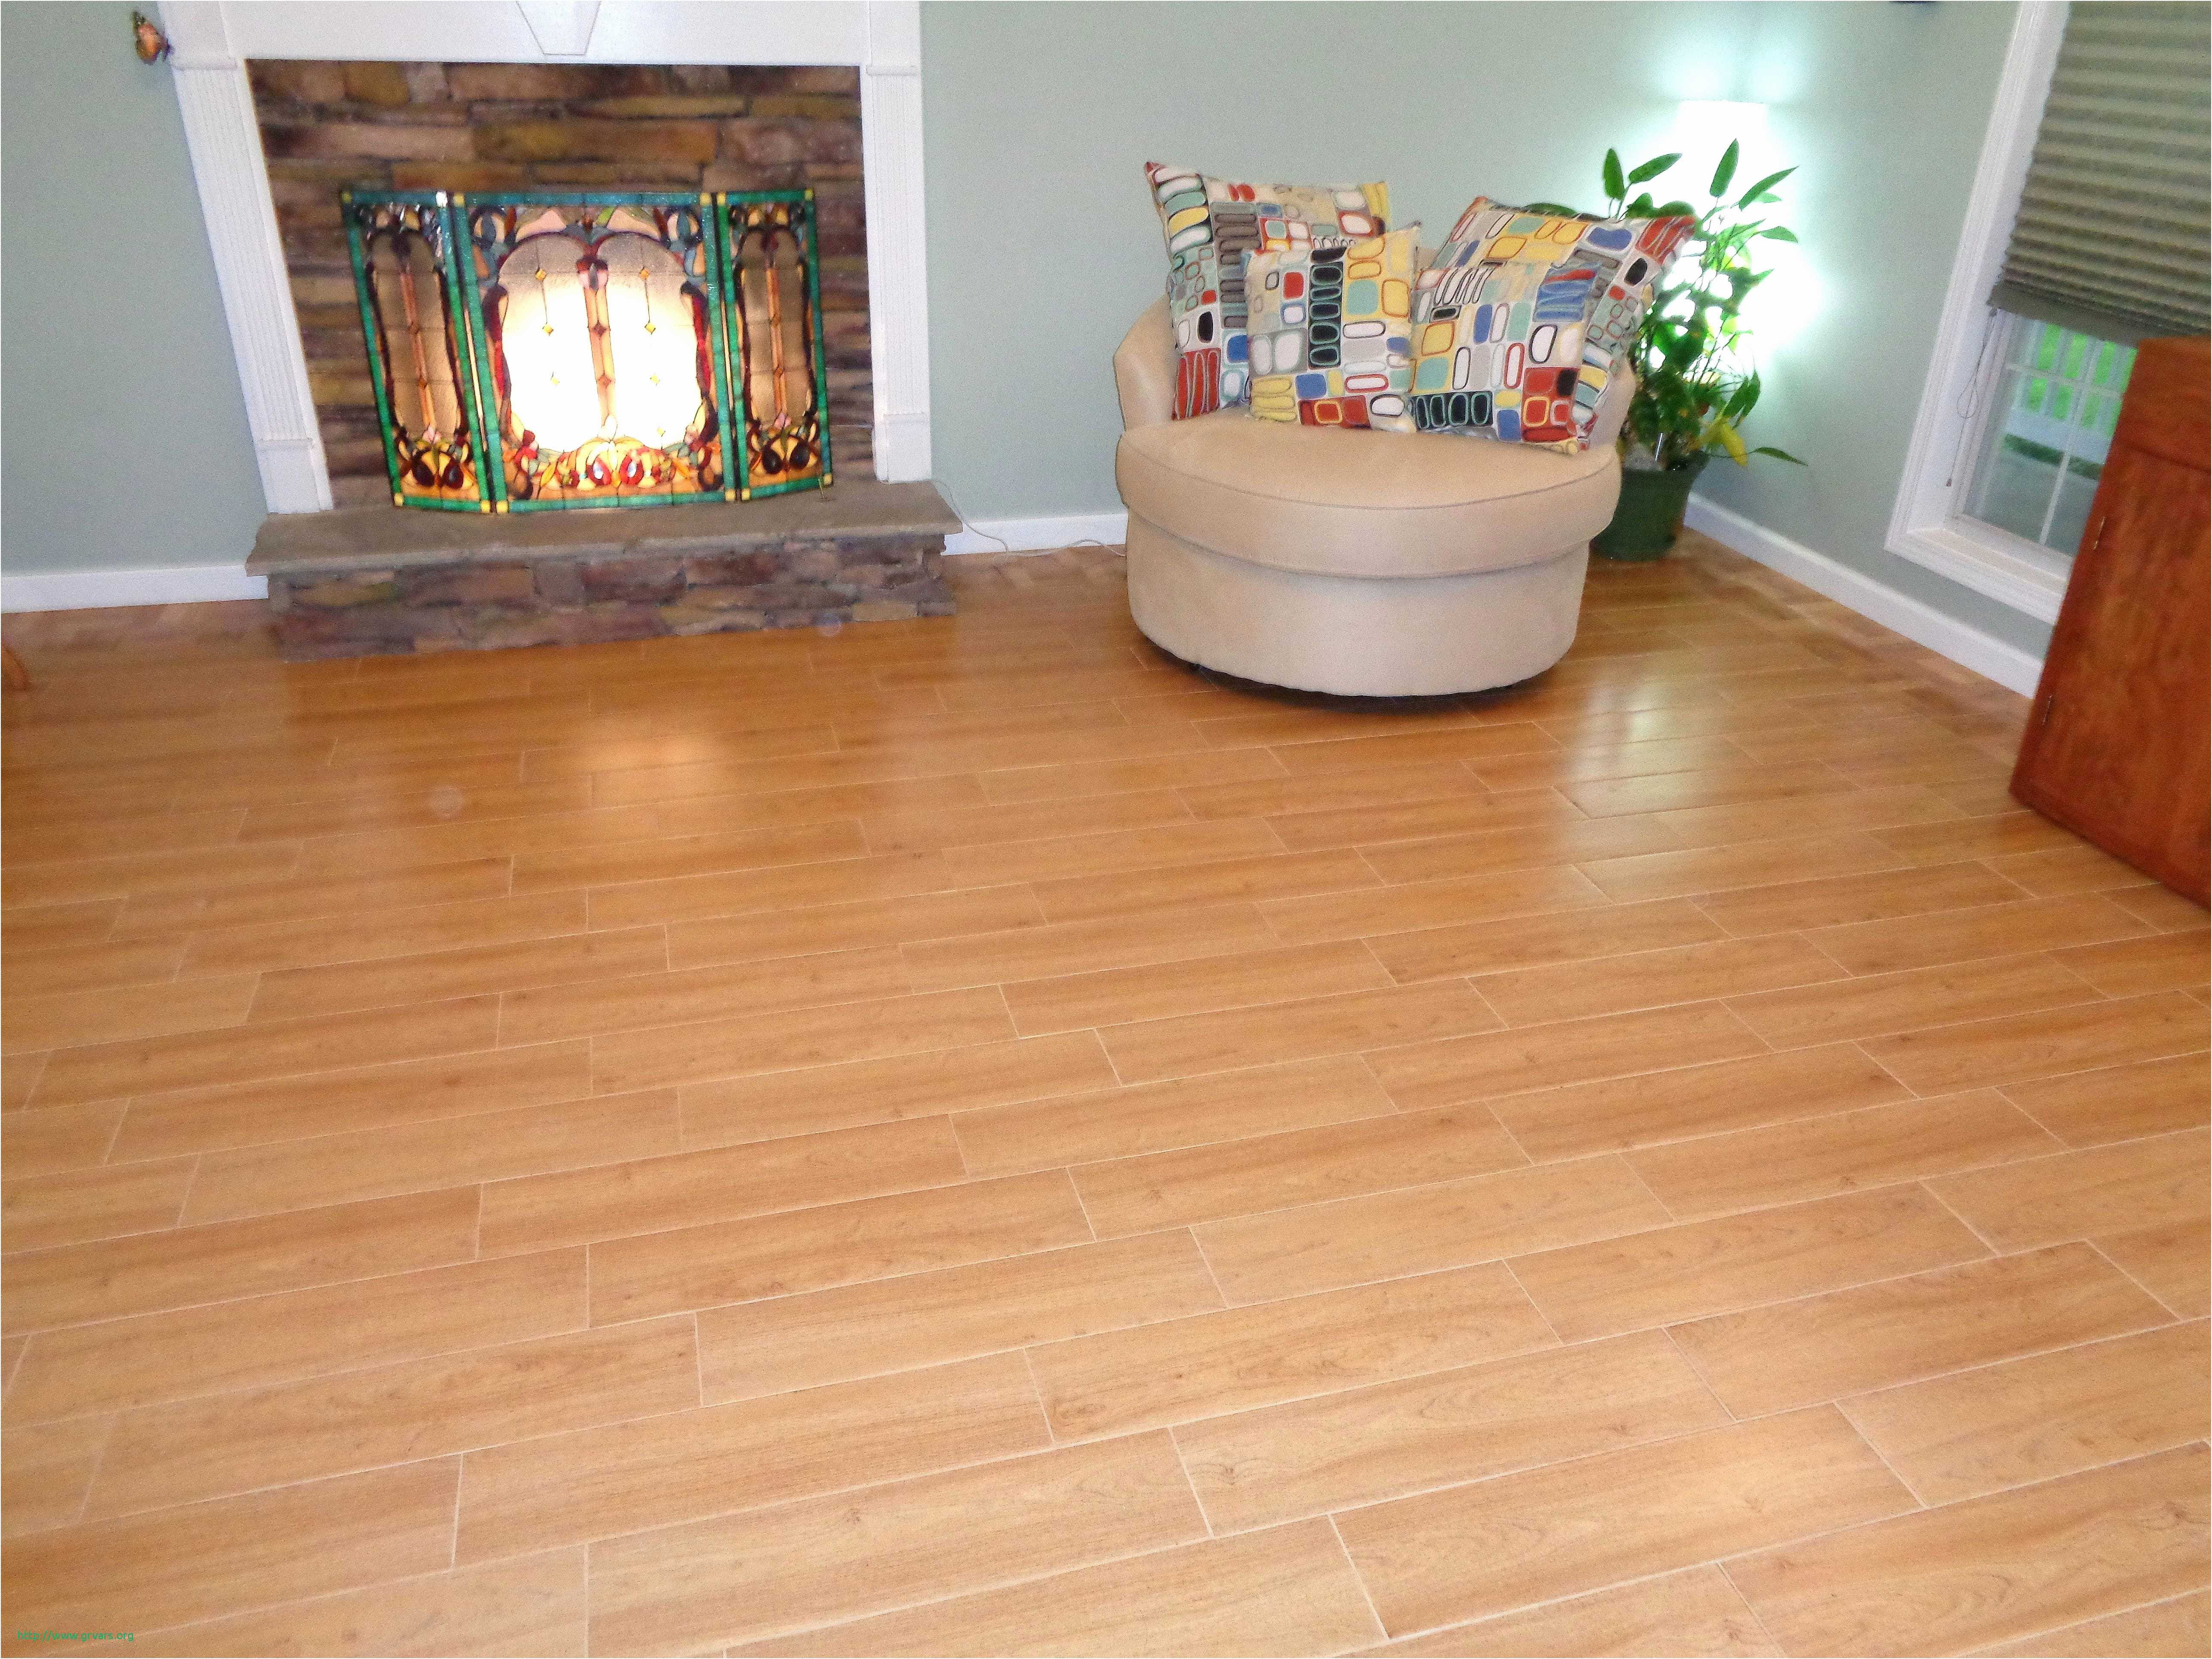 30 Best Hardwood Flooring Styles and Colors 2024 free download hardwood flooring styles and colors of 24 beau changing the color of hardwood floors ideas blog intended for changing the color of hardwood floors inspirant pergo flooring colors concrete to